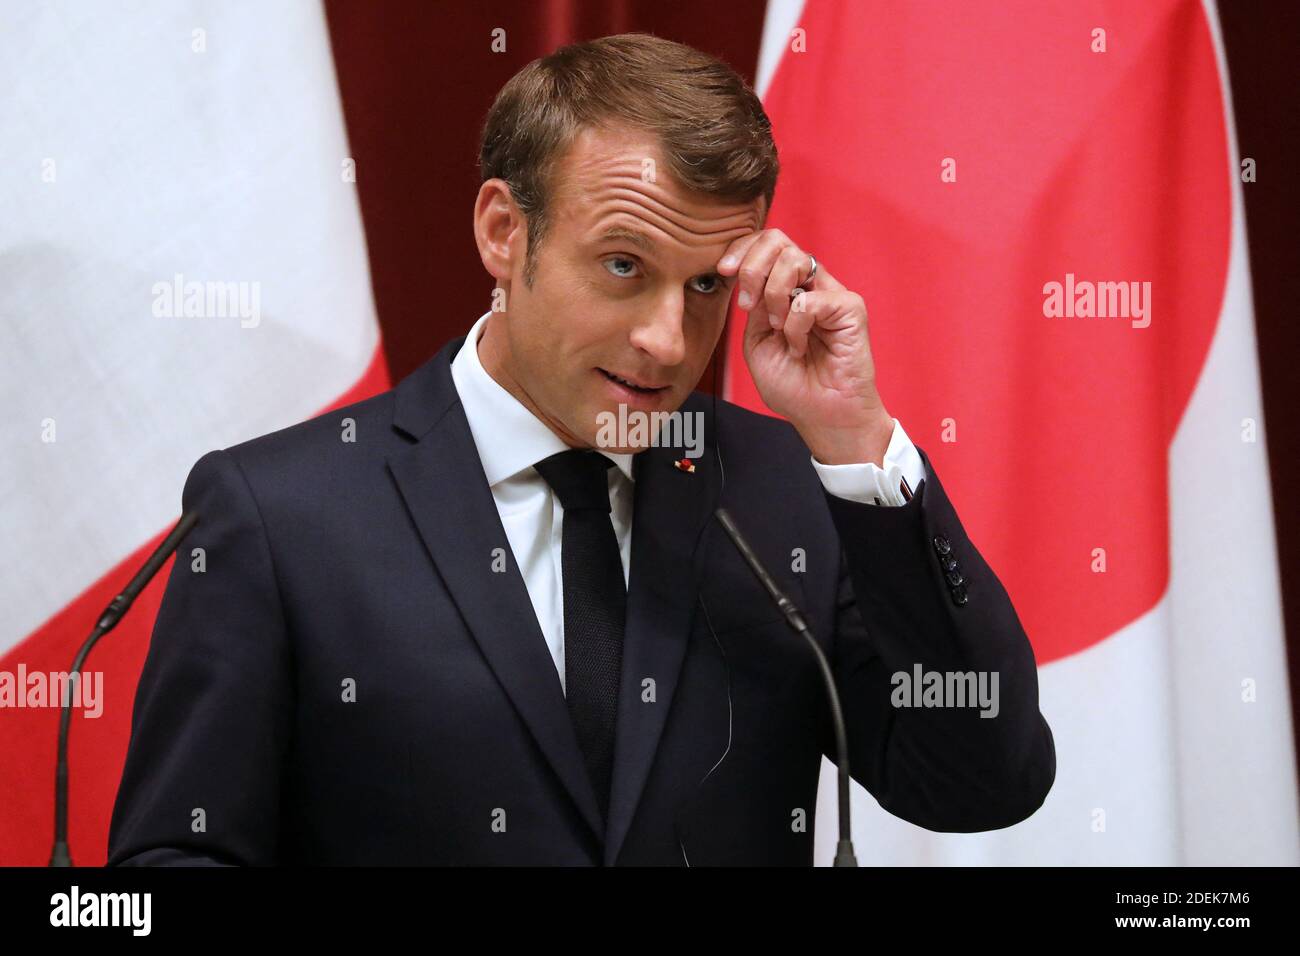 France's President Emmanuel Macron speaks during a joint press conference with Japan's Prime Minister Shinzo Abe in Tokyo on June 26, 2019. Photo by Ludovic MARIN / Pool / ABACAPRESS.COM Stock Photo